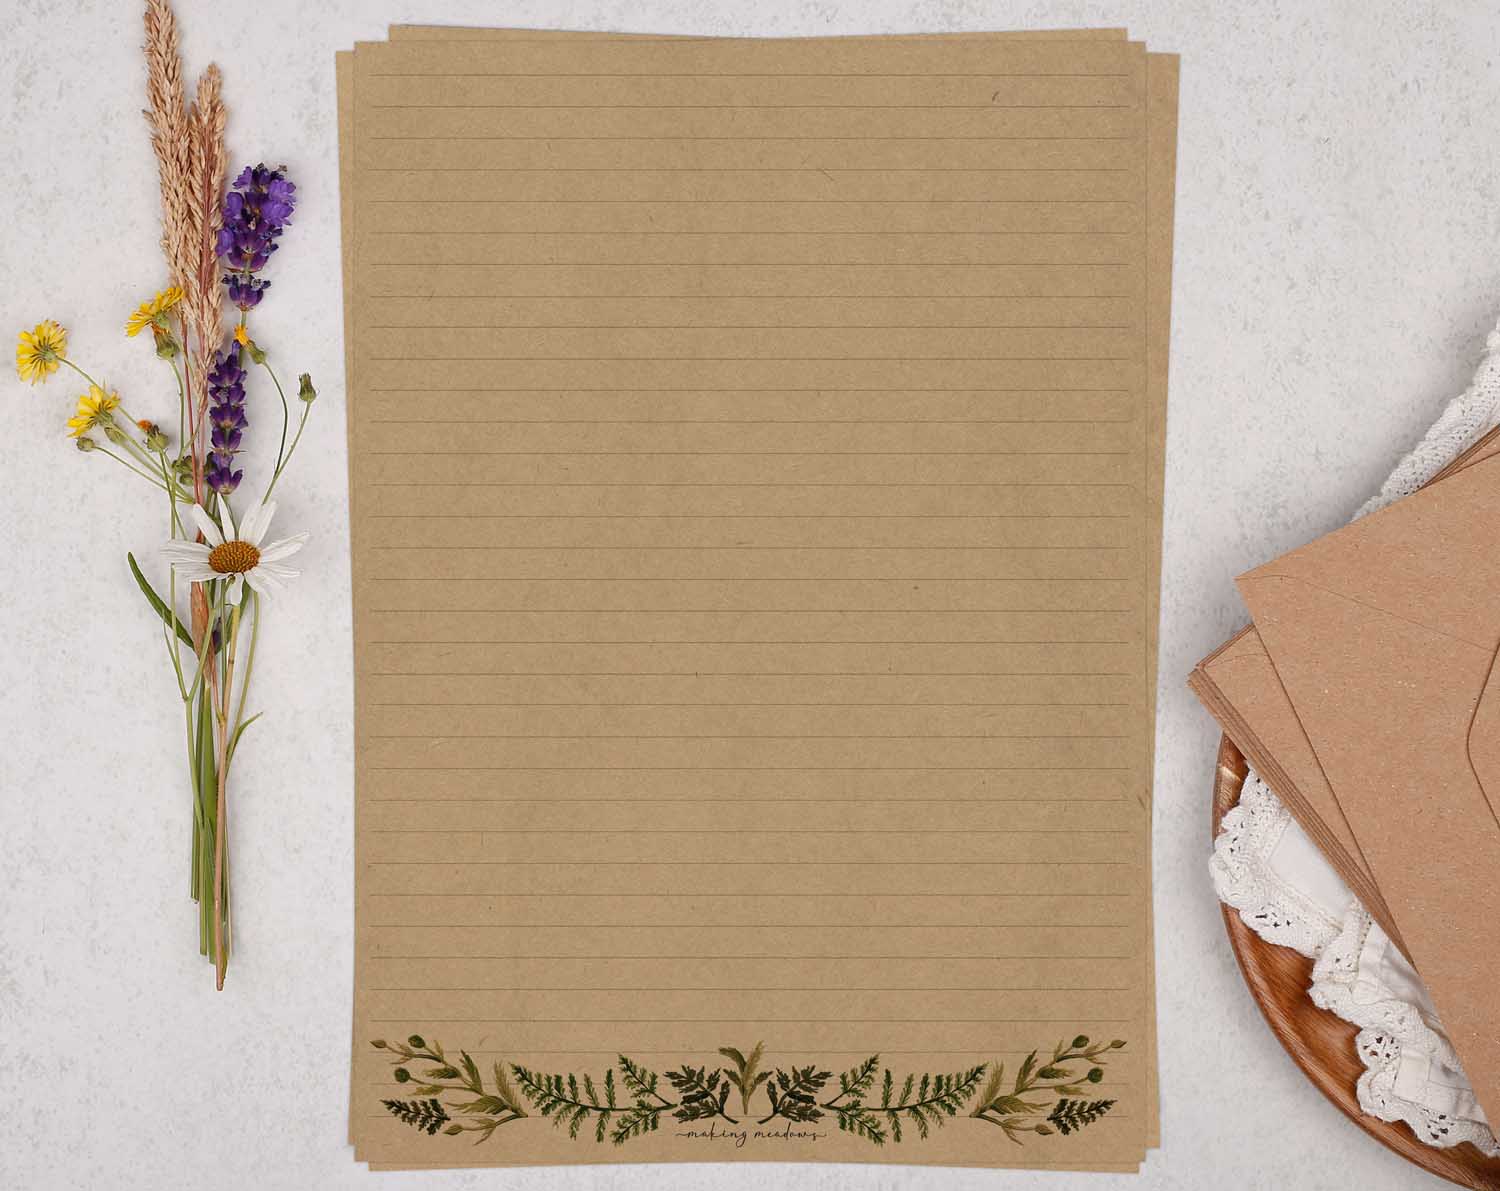 A4 Kraft letter writing paper sheets with a watercolour botanical border design along the bottom.